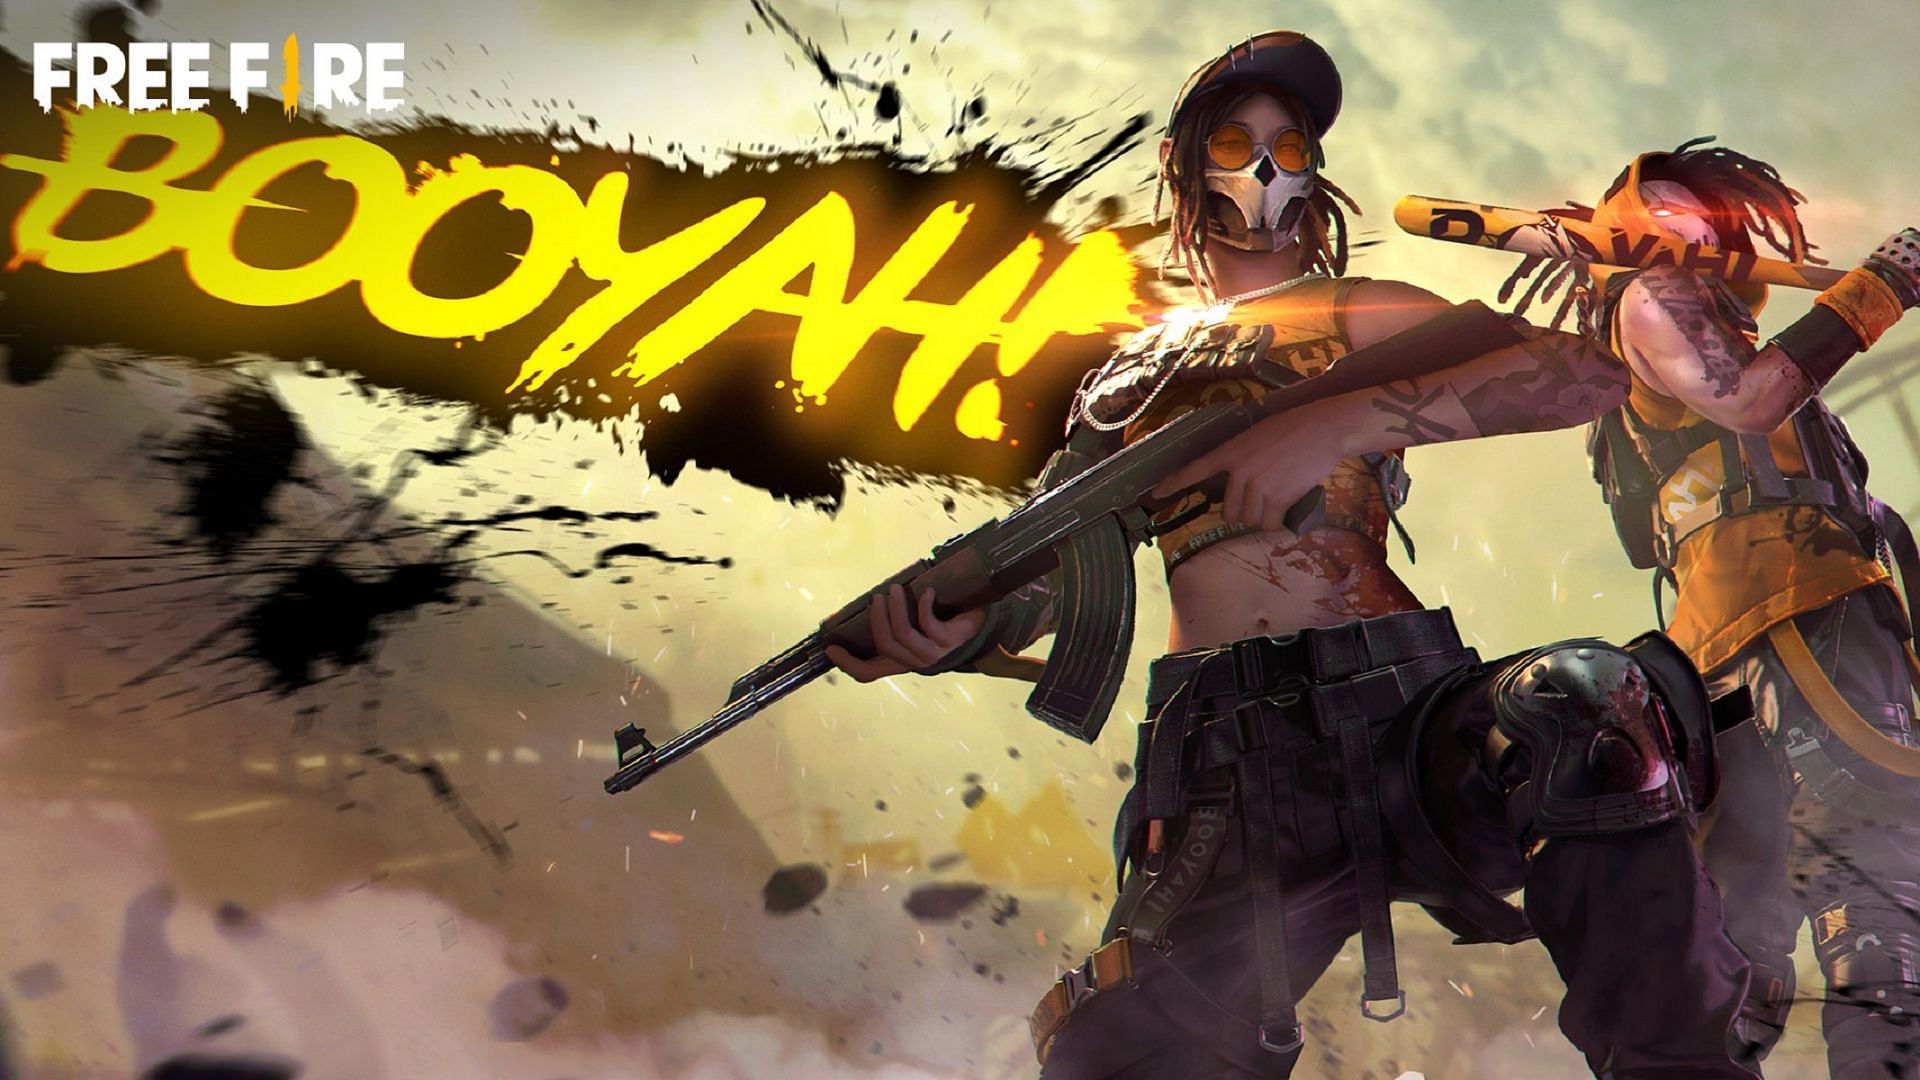 Events on Booyah Day are in Free Fire (Image via Free Fire)